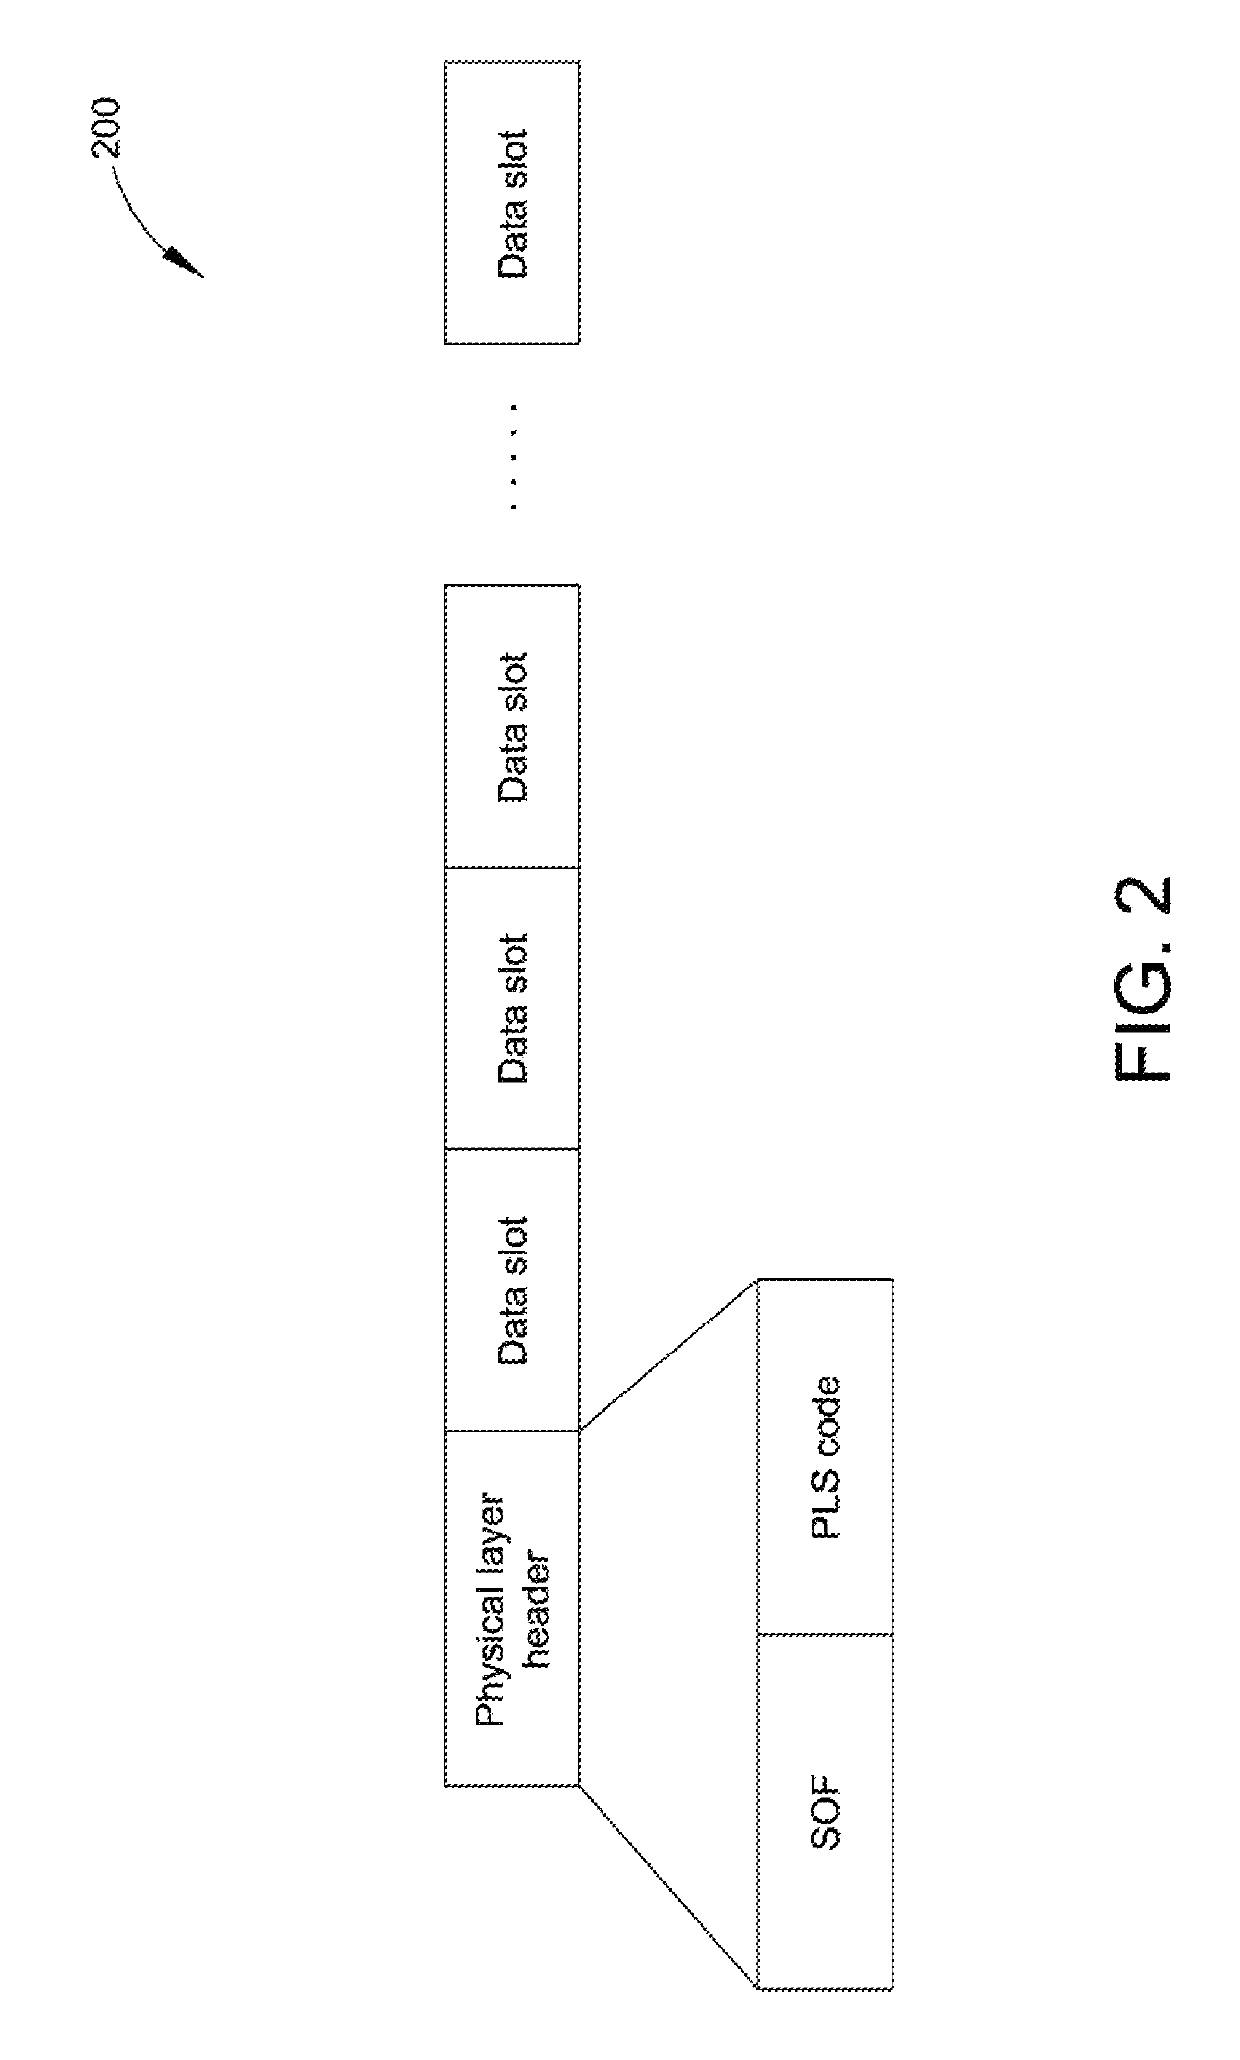 Decoding circuit applied to multimedia apparatus and associated decoding method